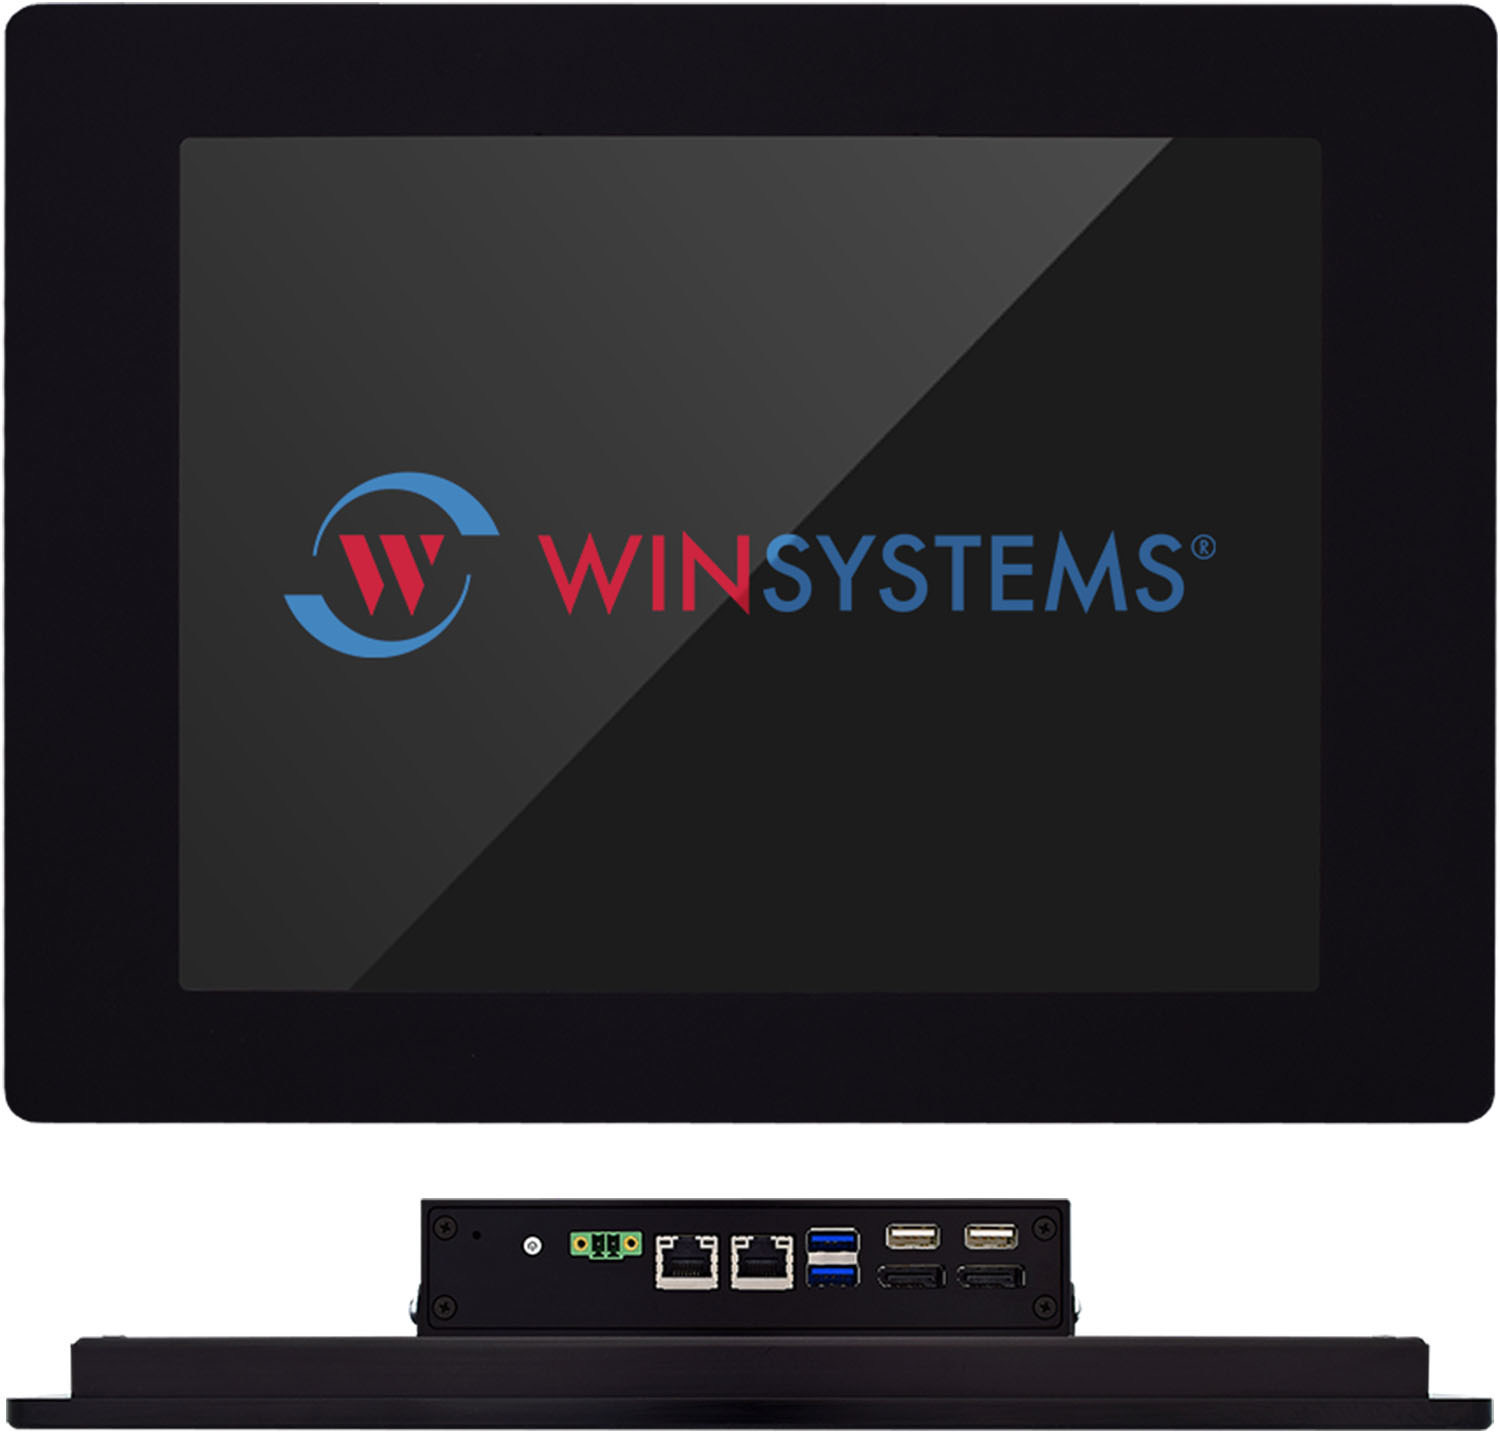 WINSYSTEMS Unveils Fanless IP65-Rated Panel PC for Rugged Operating Environments That Sustains Full Intel E3900 Performance at -30 to +85C